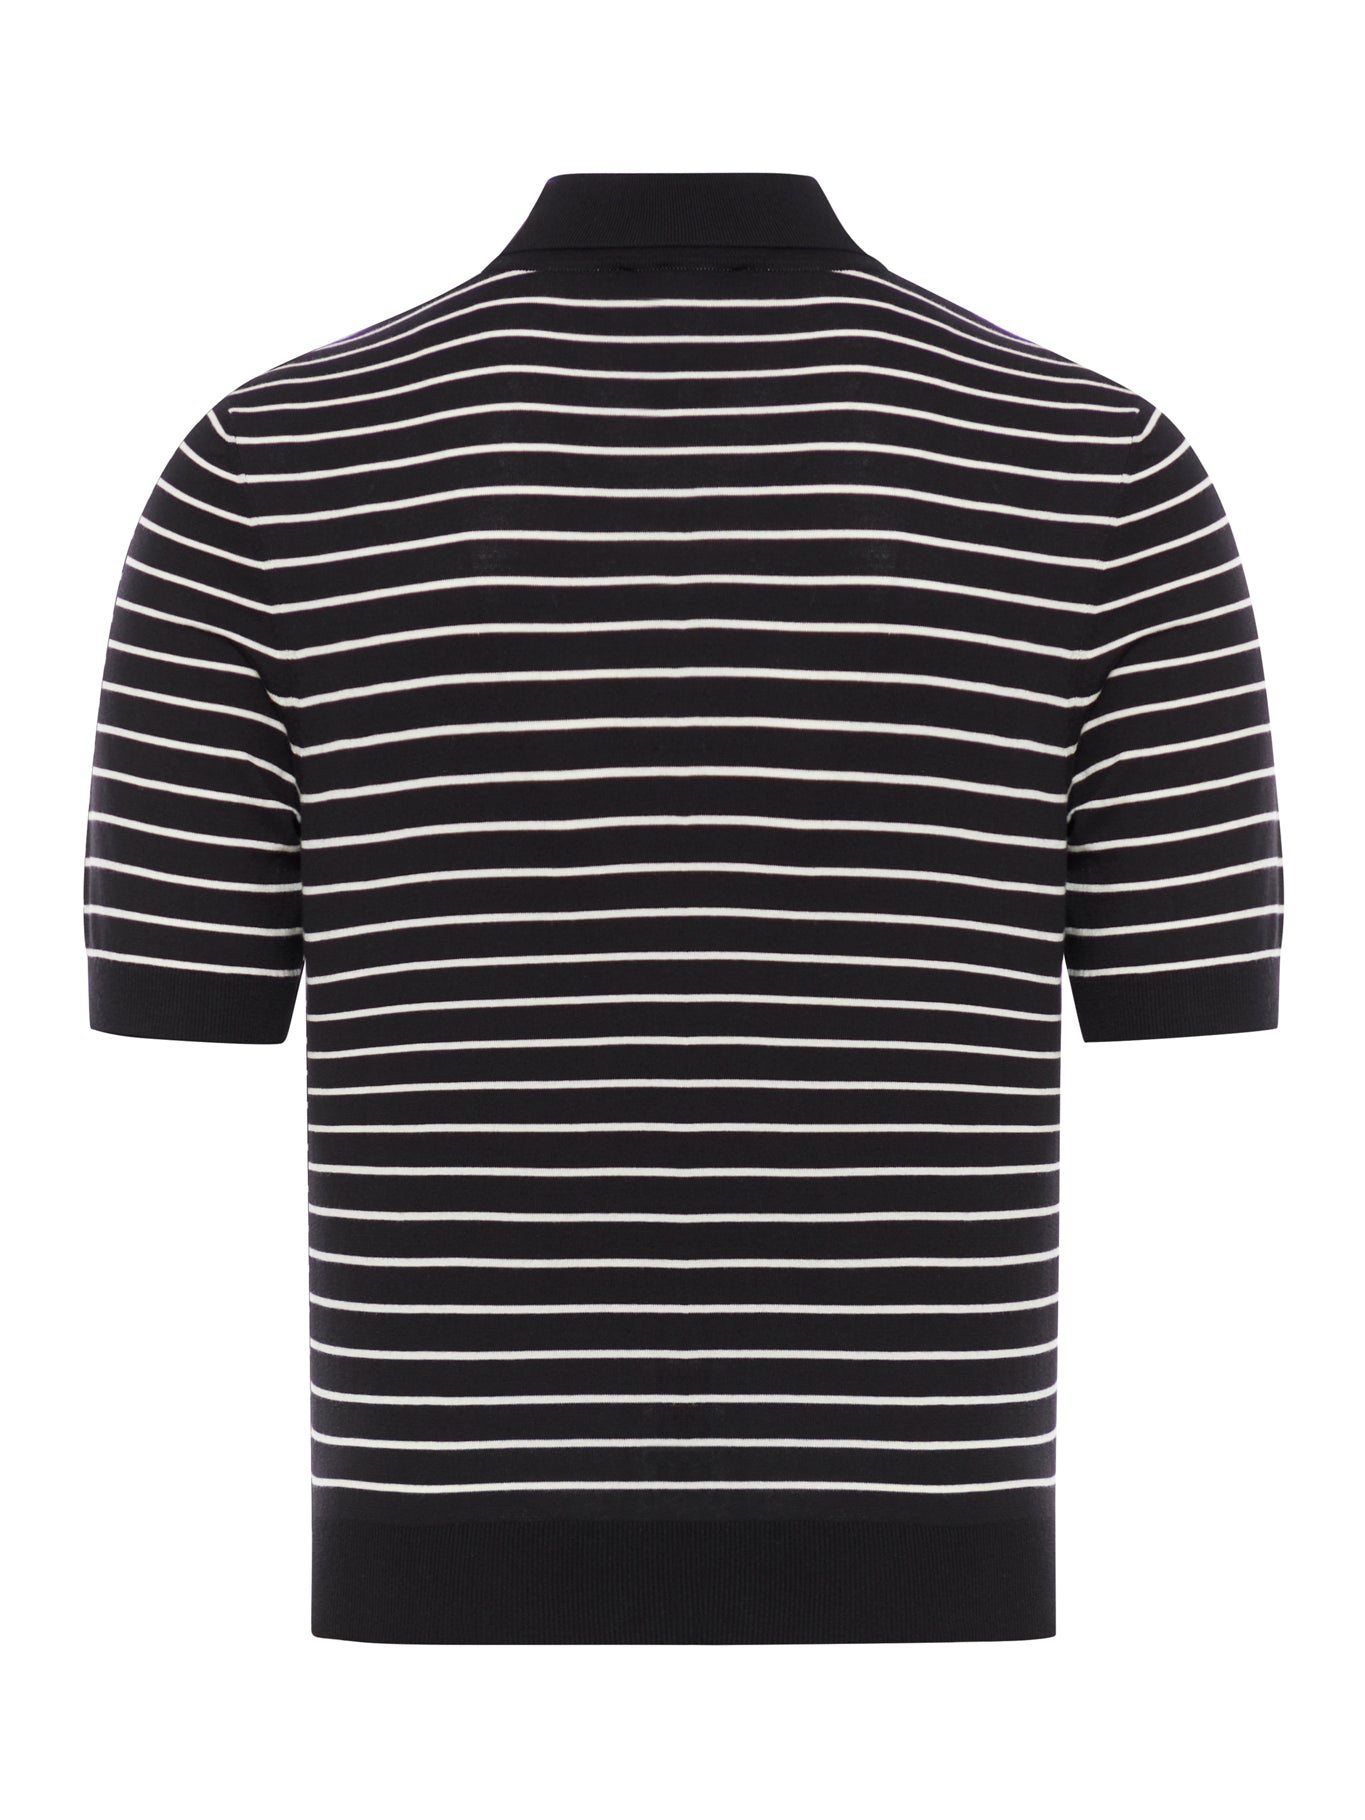 TRIOMPHE POLO SHIRT IN LIGHTWEIGHT COTTON